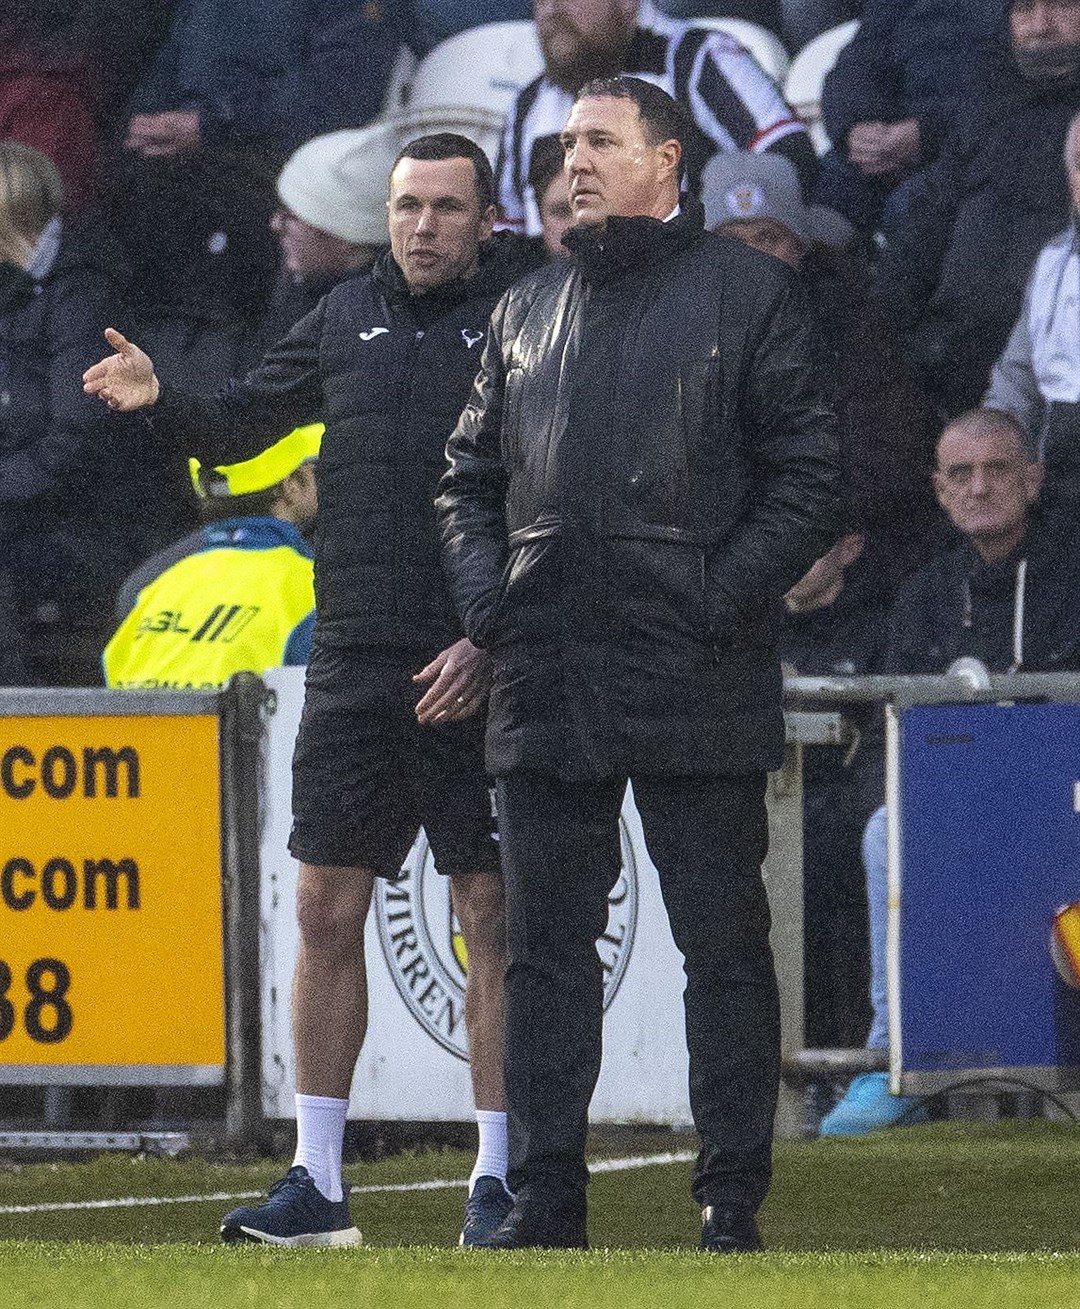 Ross County manager Malky Mackay valued Don Cowie's counsel as assistant manager.